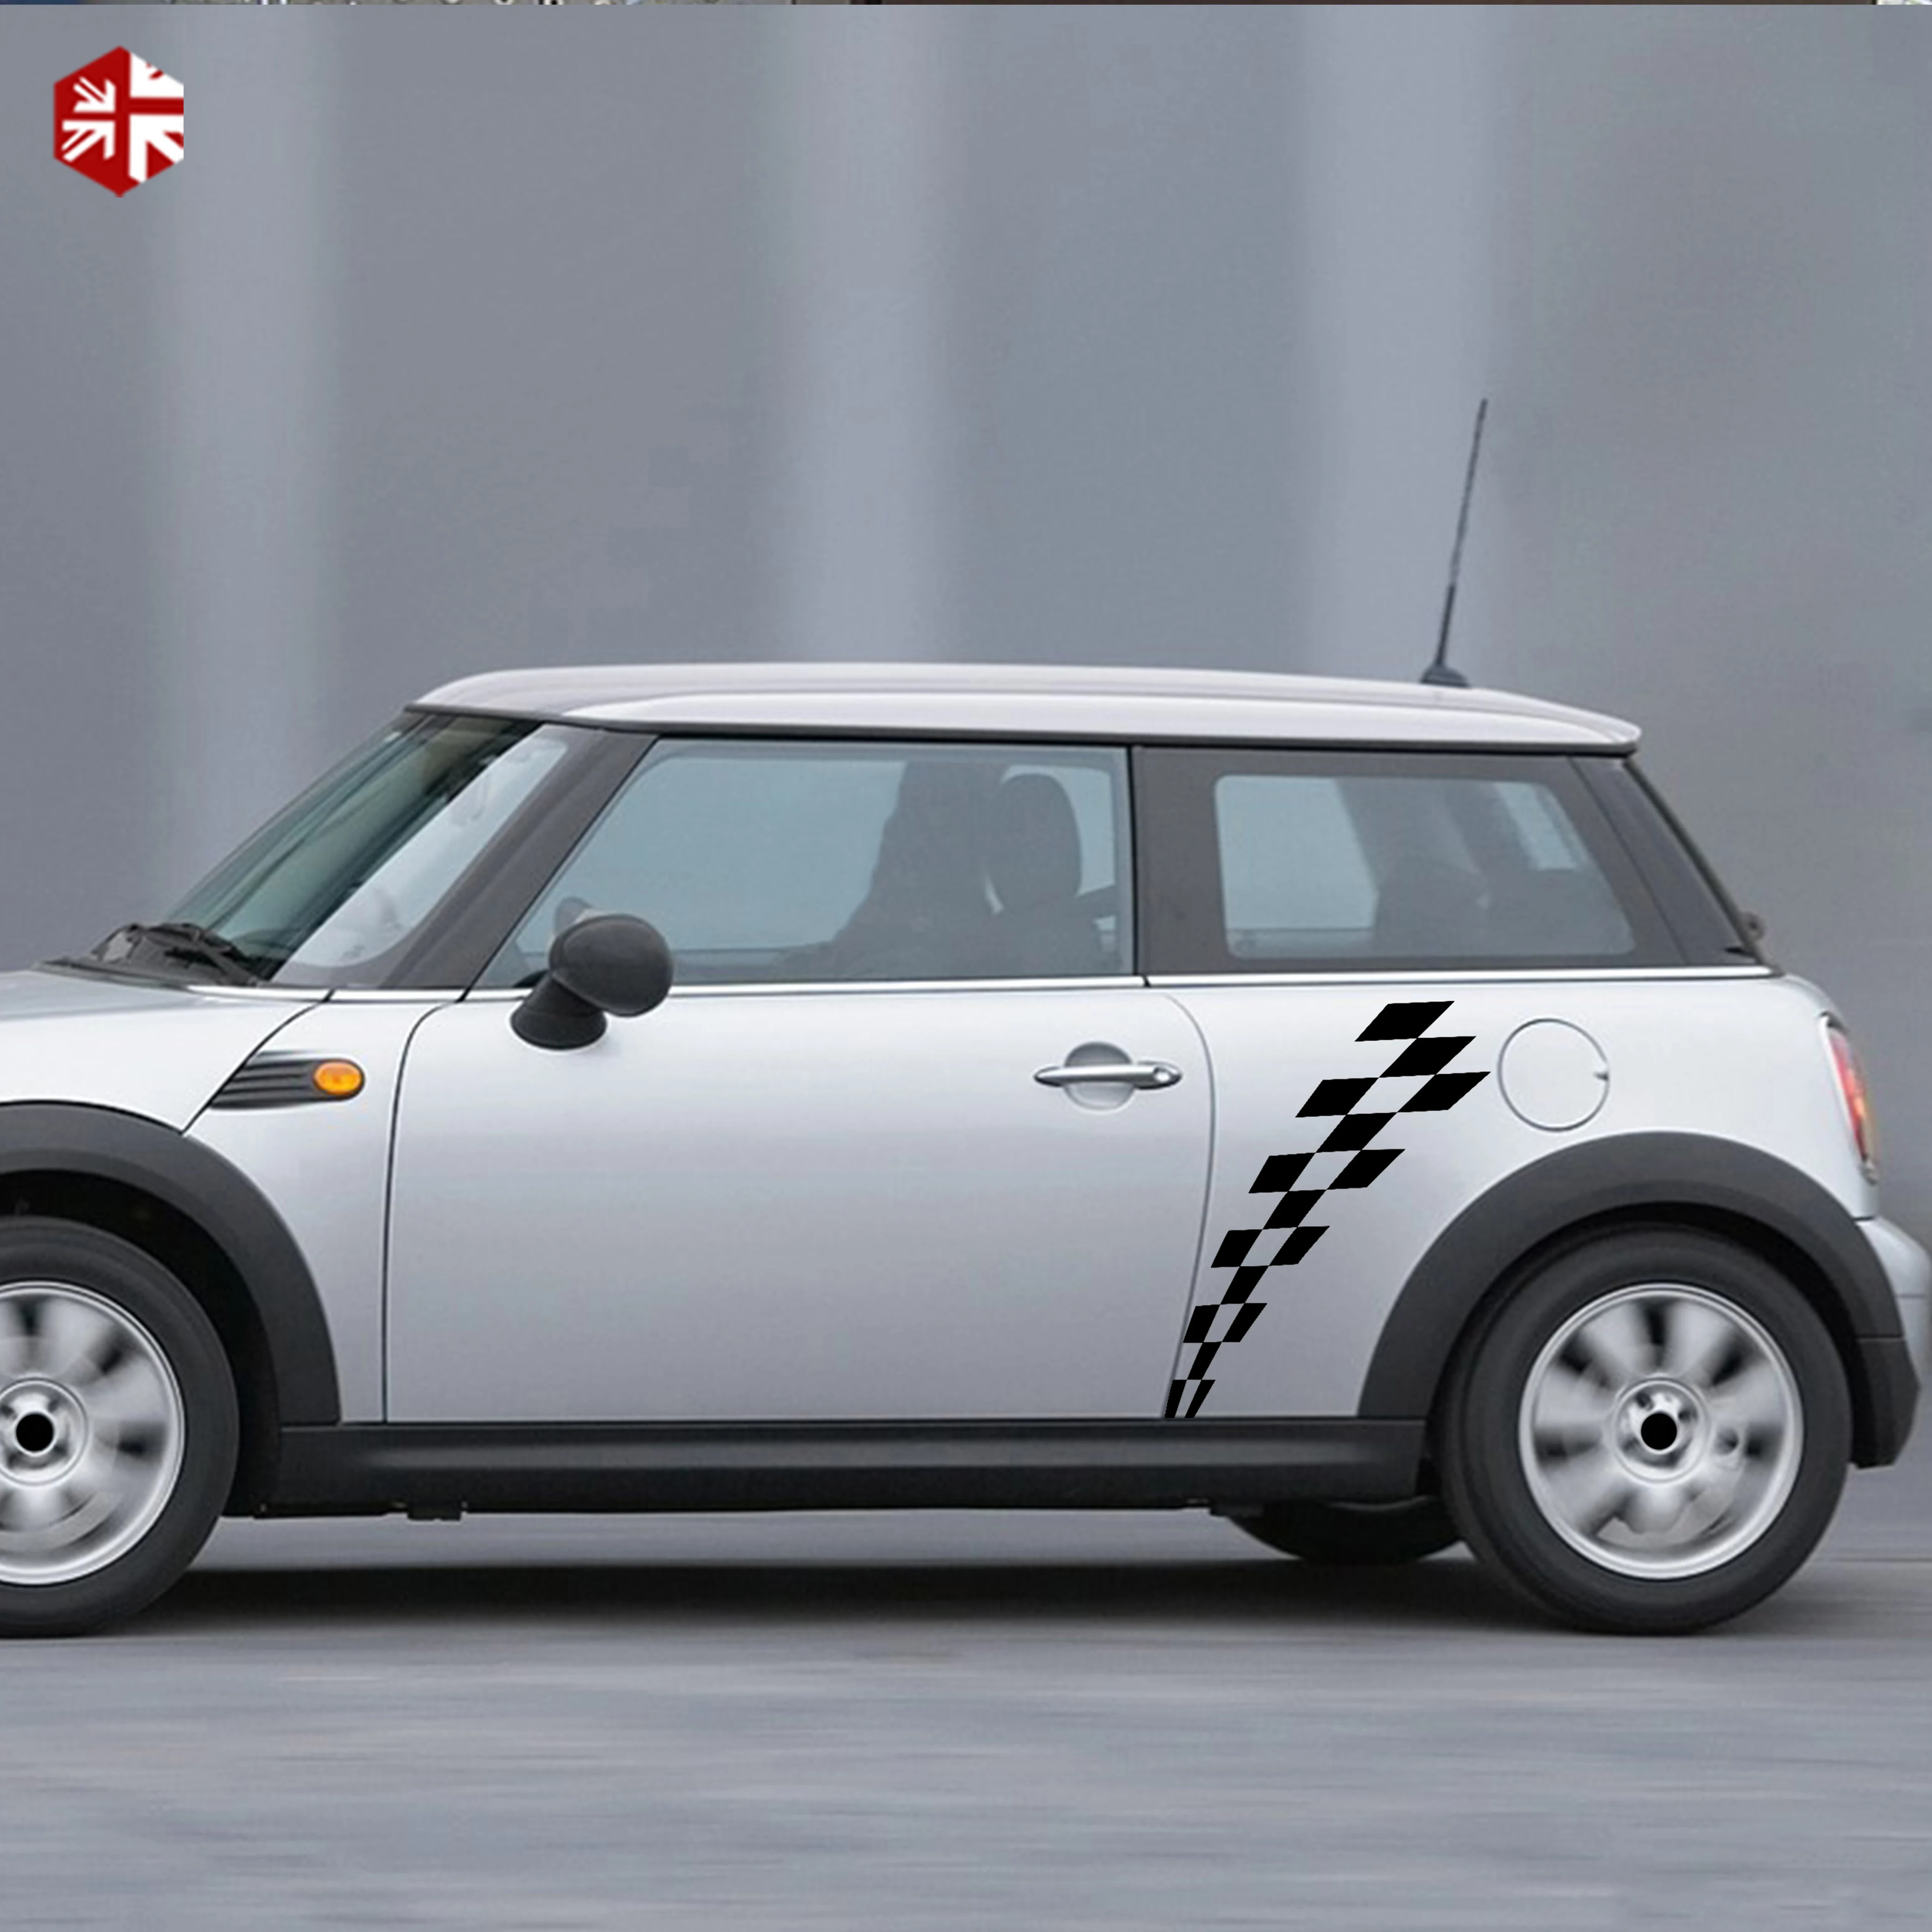 2 Pcs Checkered Flag Styling Car Door Side Stripes Sticker Body Body Decal For MINI Cooper S R50 R52 R53 JCW One Accessories